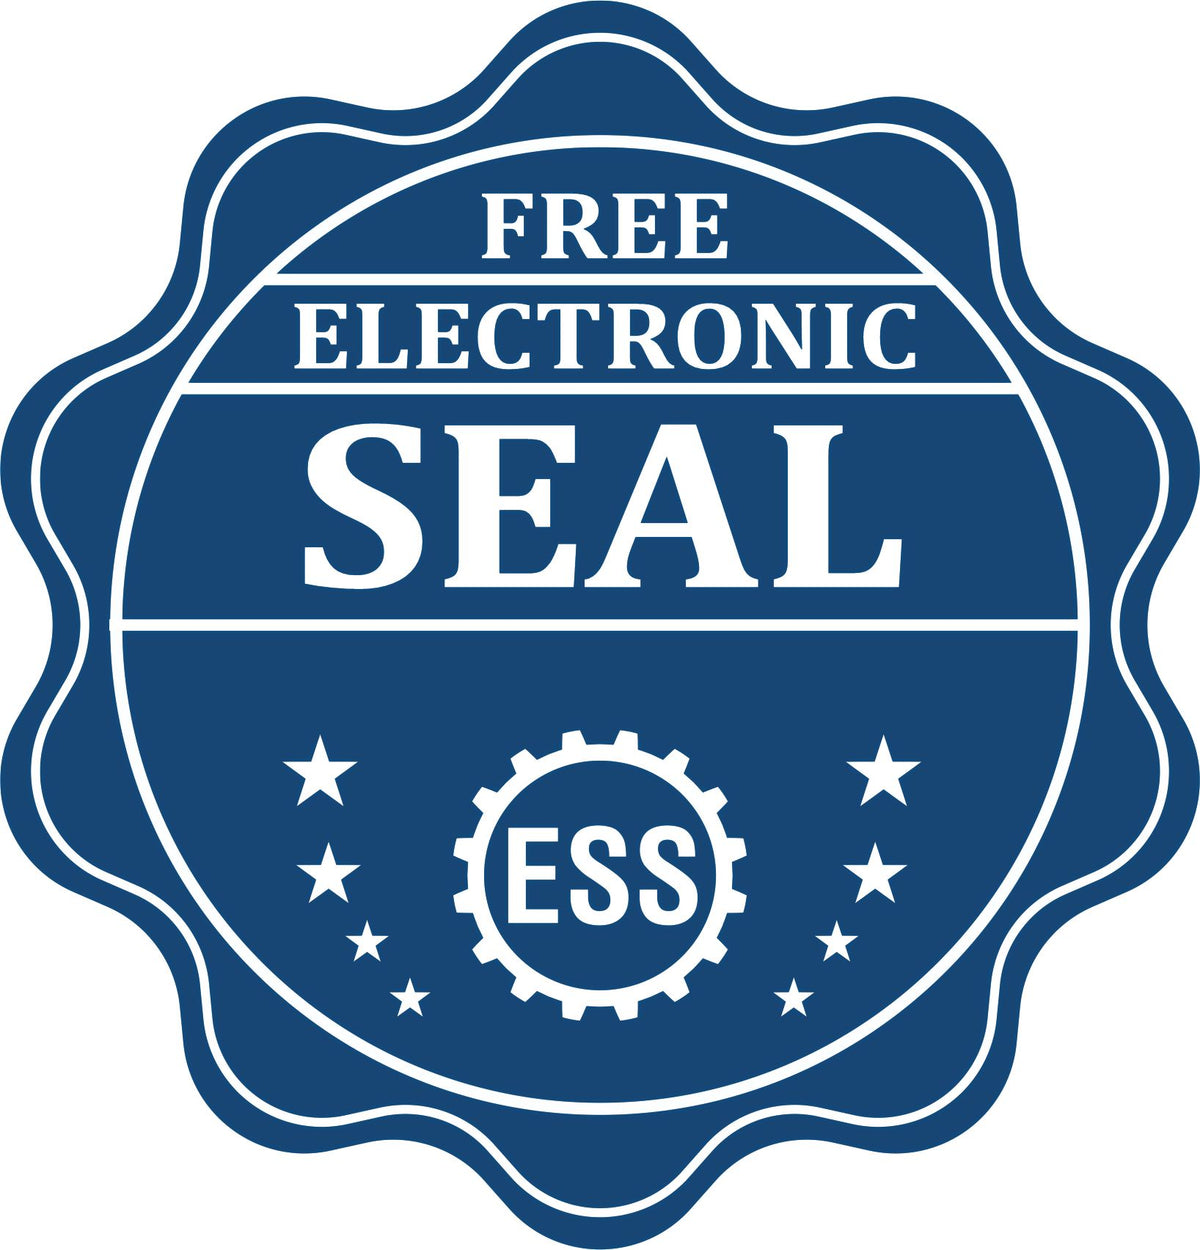 A badge showing a free electronic seal for the Long Reach Mississippi PE Seal with stars and the ESS gear on the emblem.